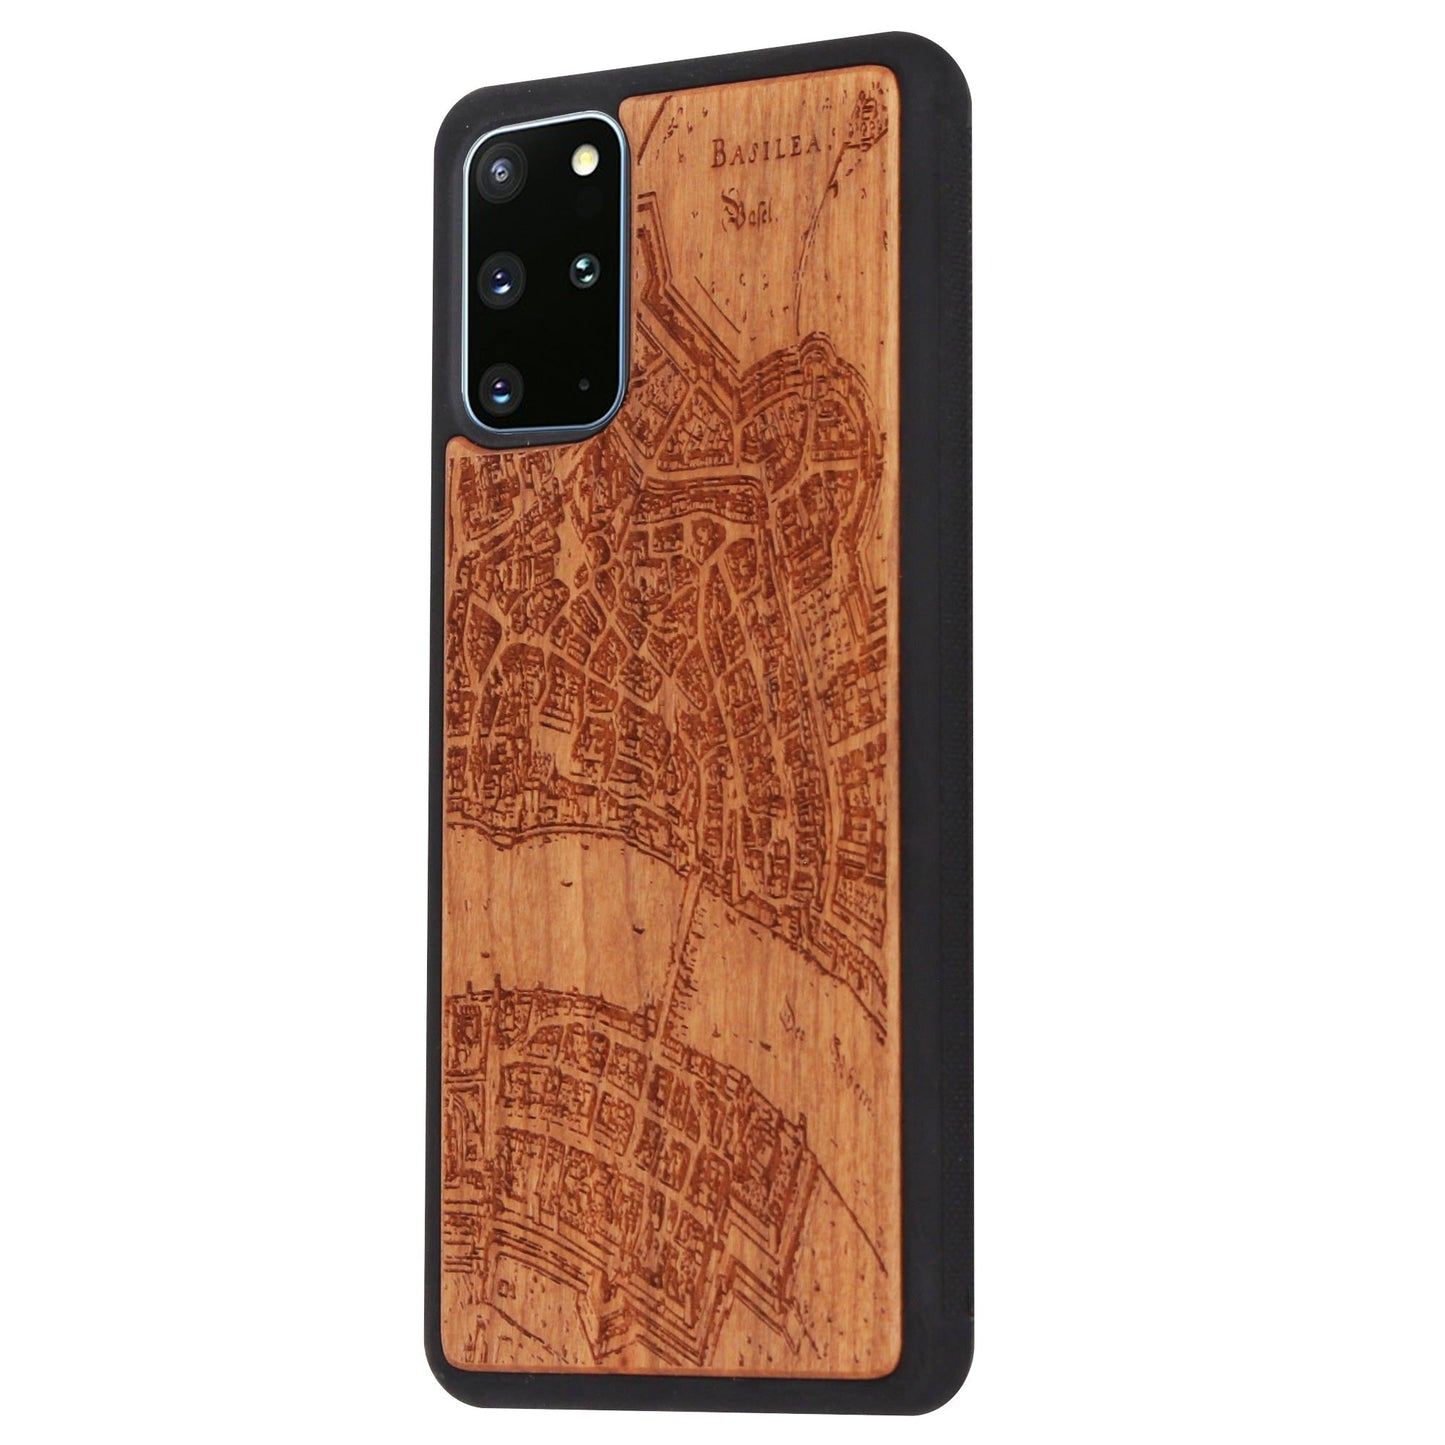 Basel Merian Eden case made of cherry wood for Samsung Galaxy S20 Plus